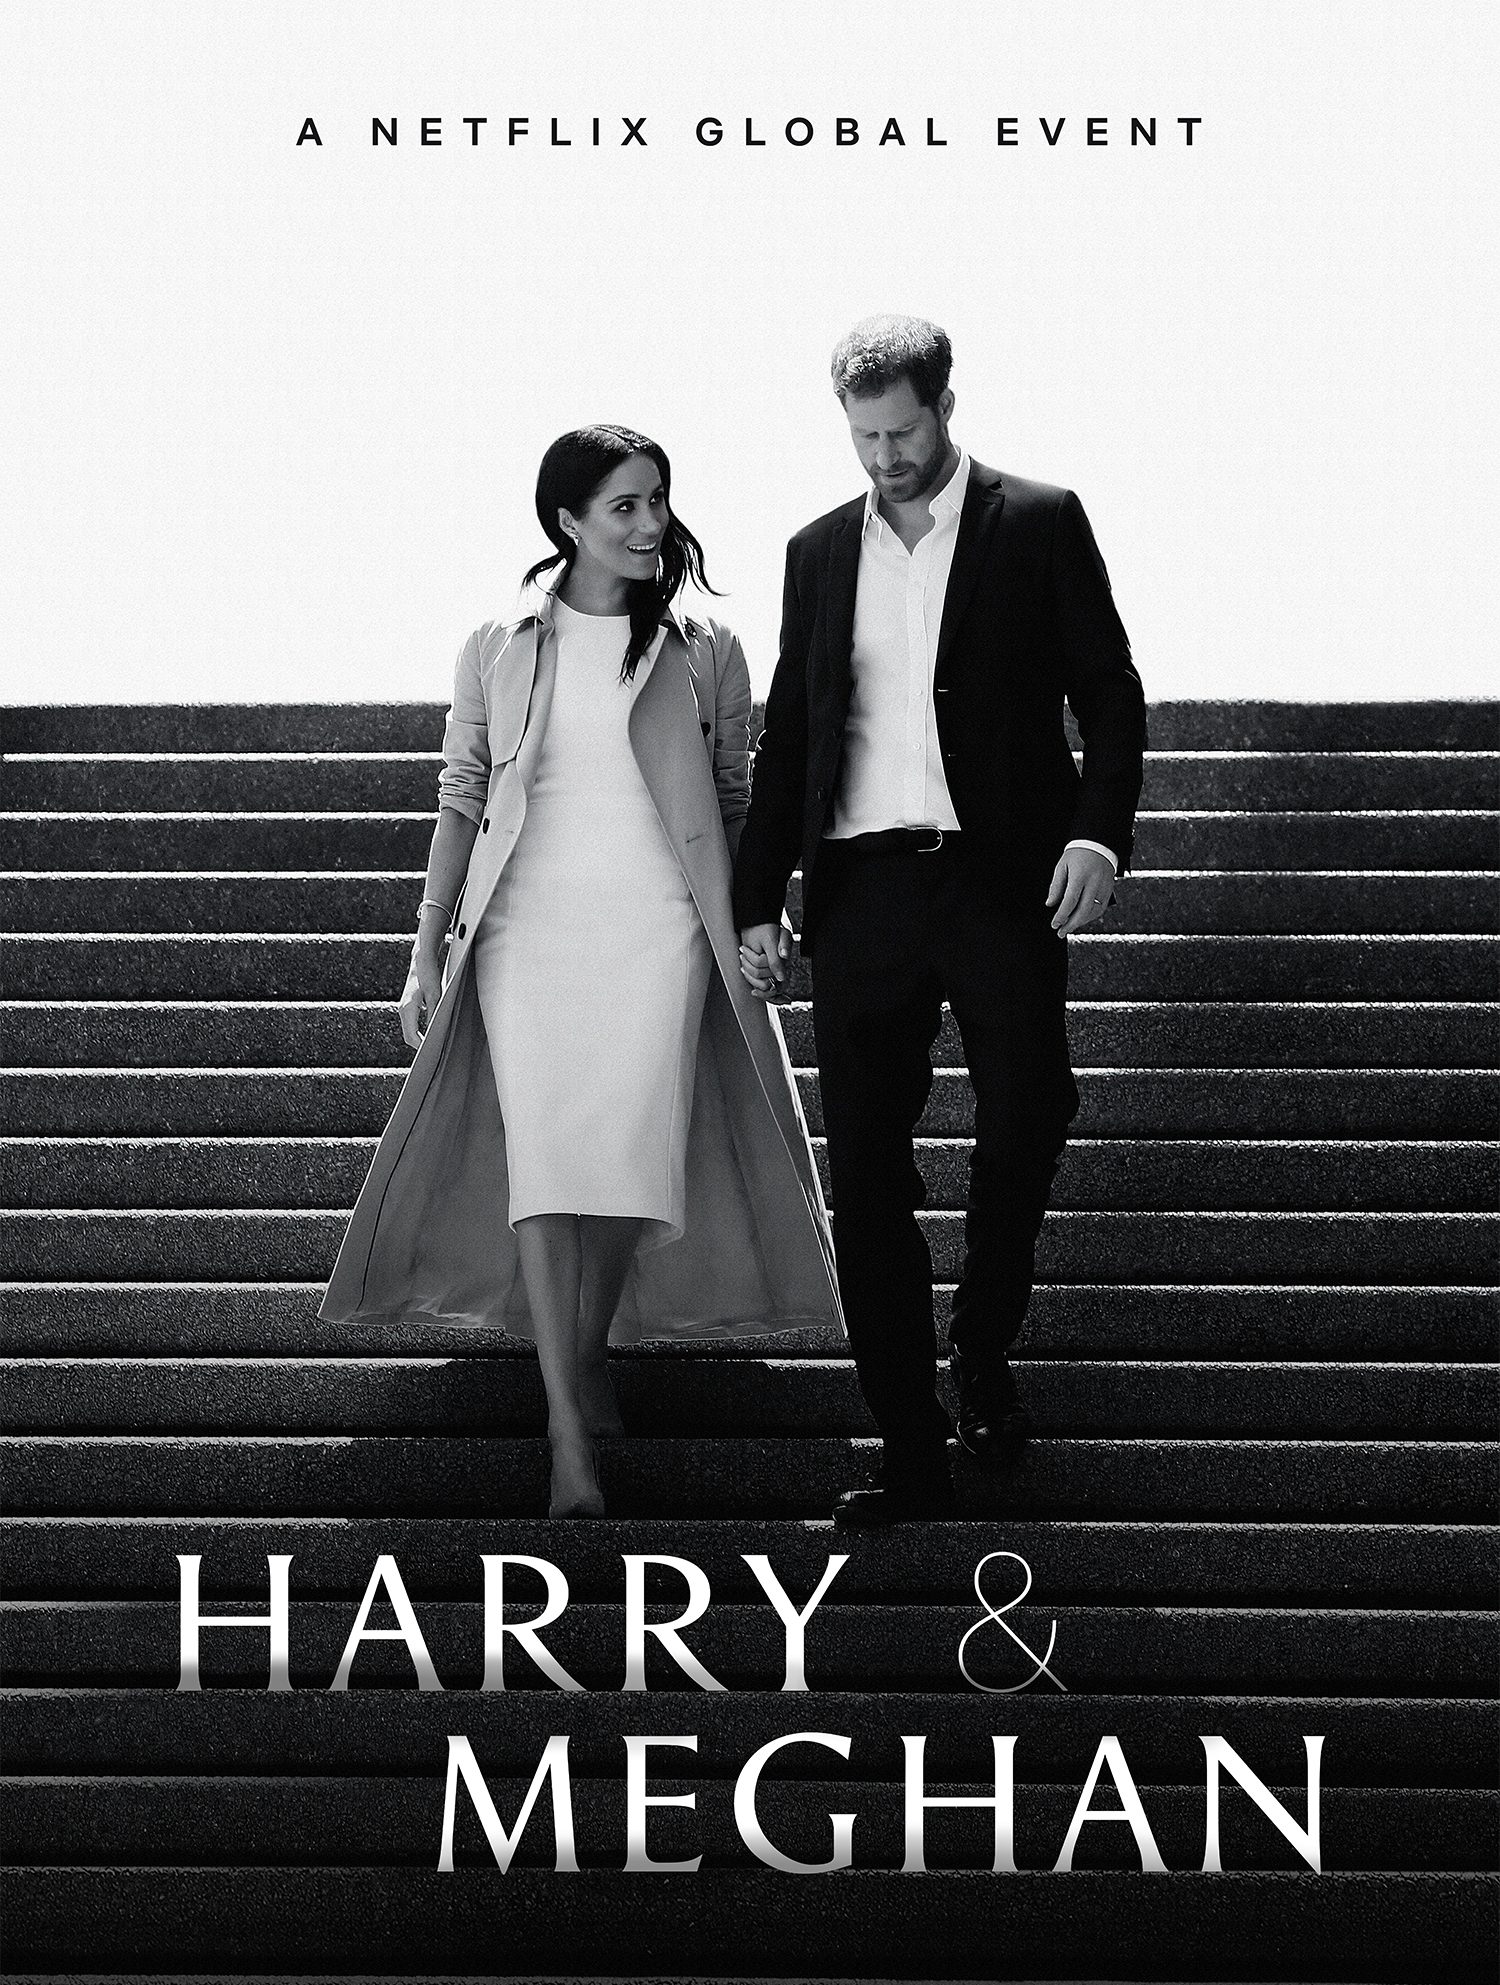 Netflix promotional material for "Meghan and Harry"